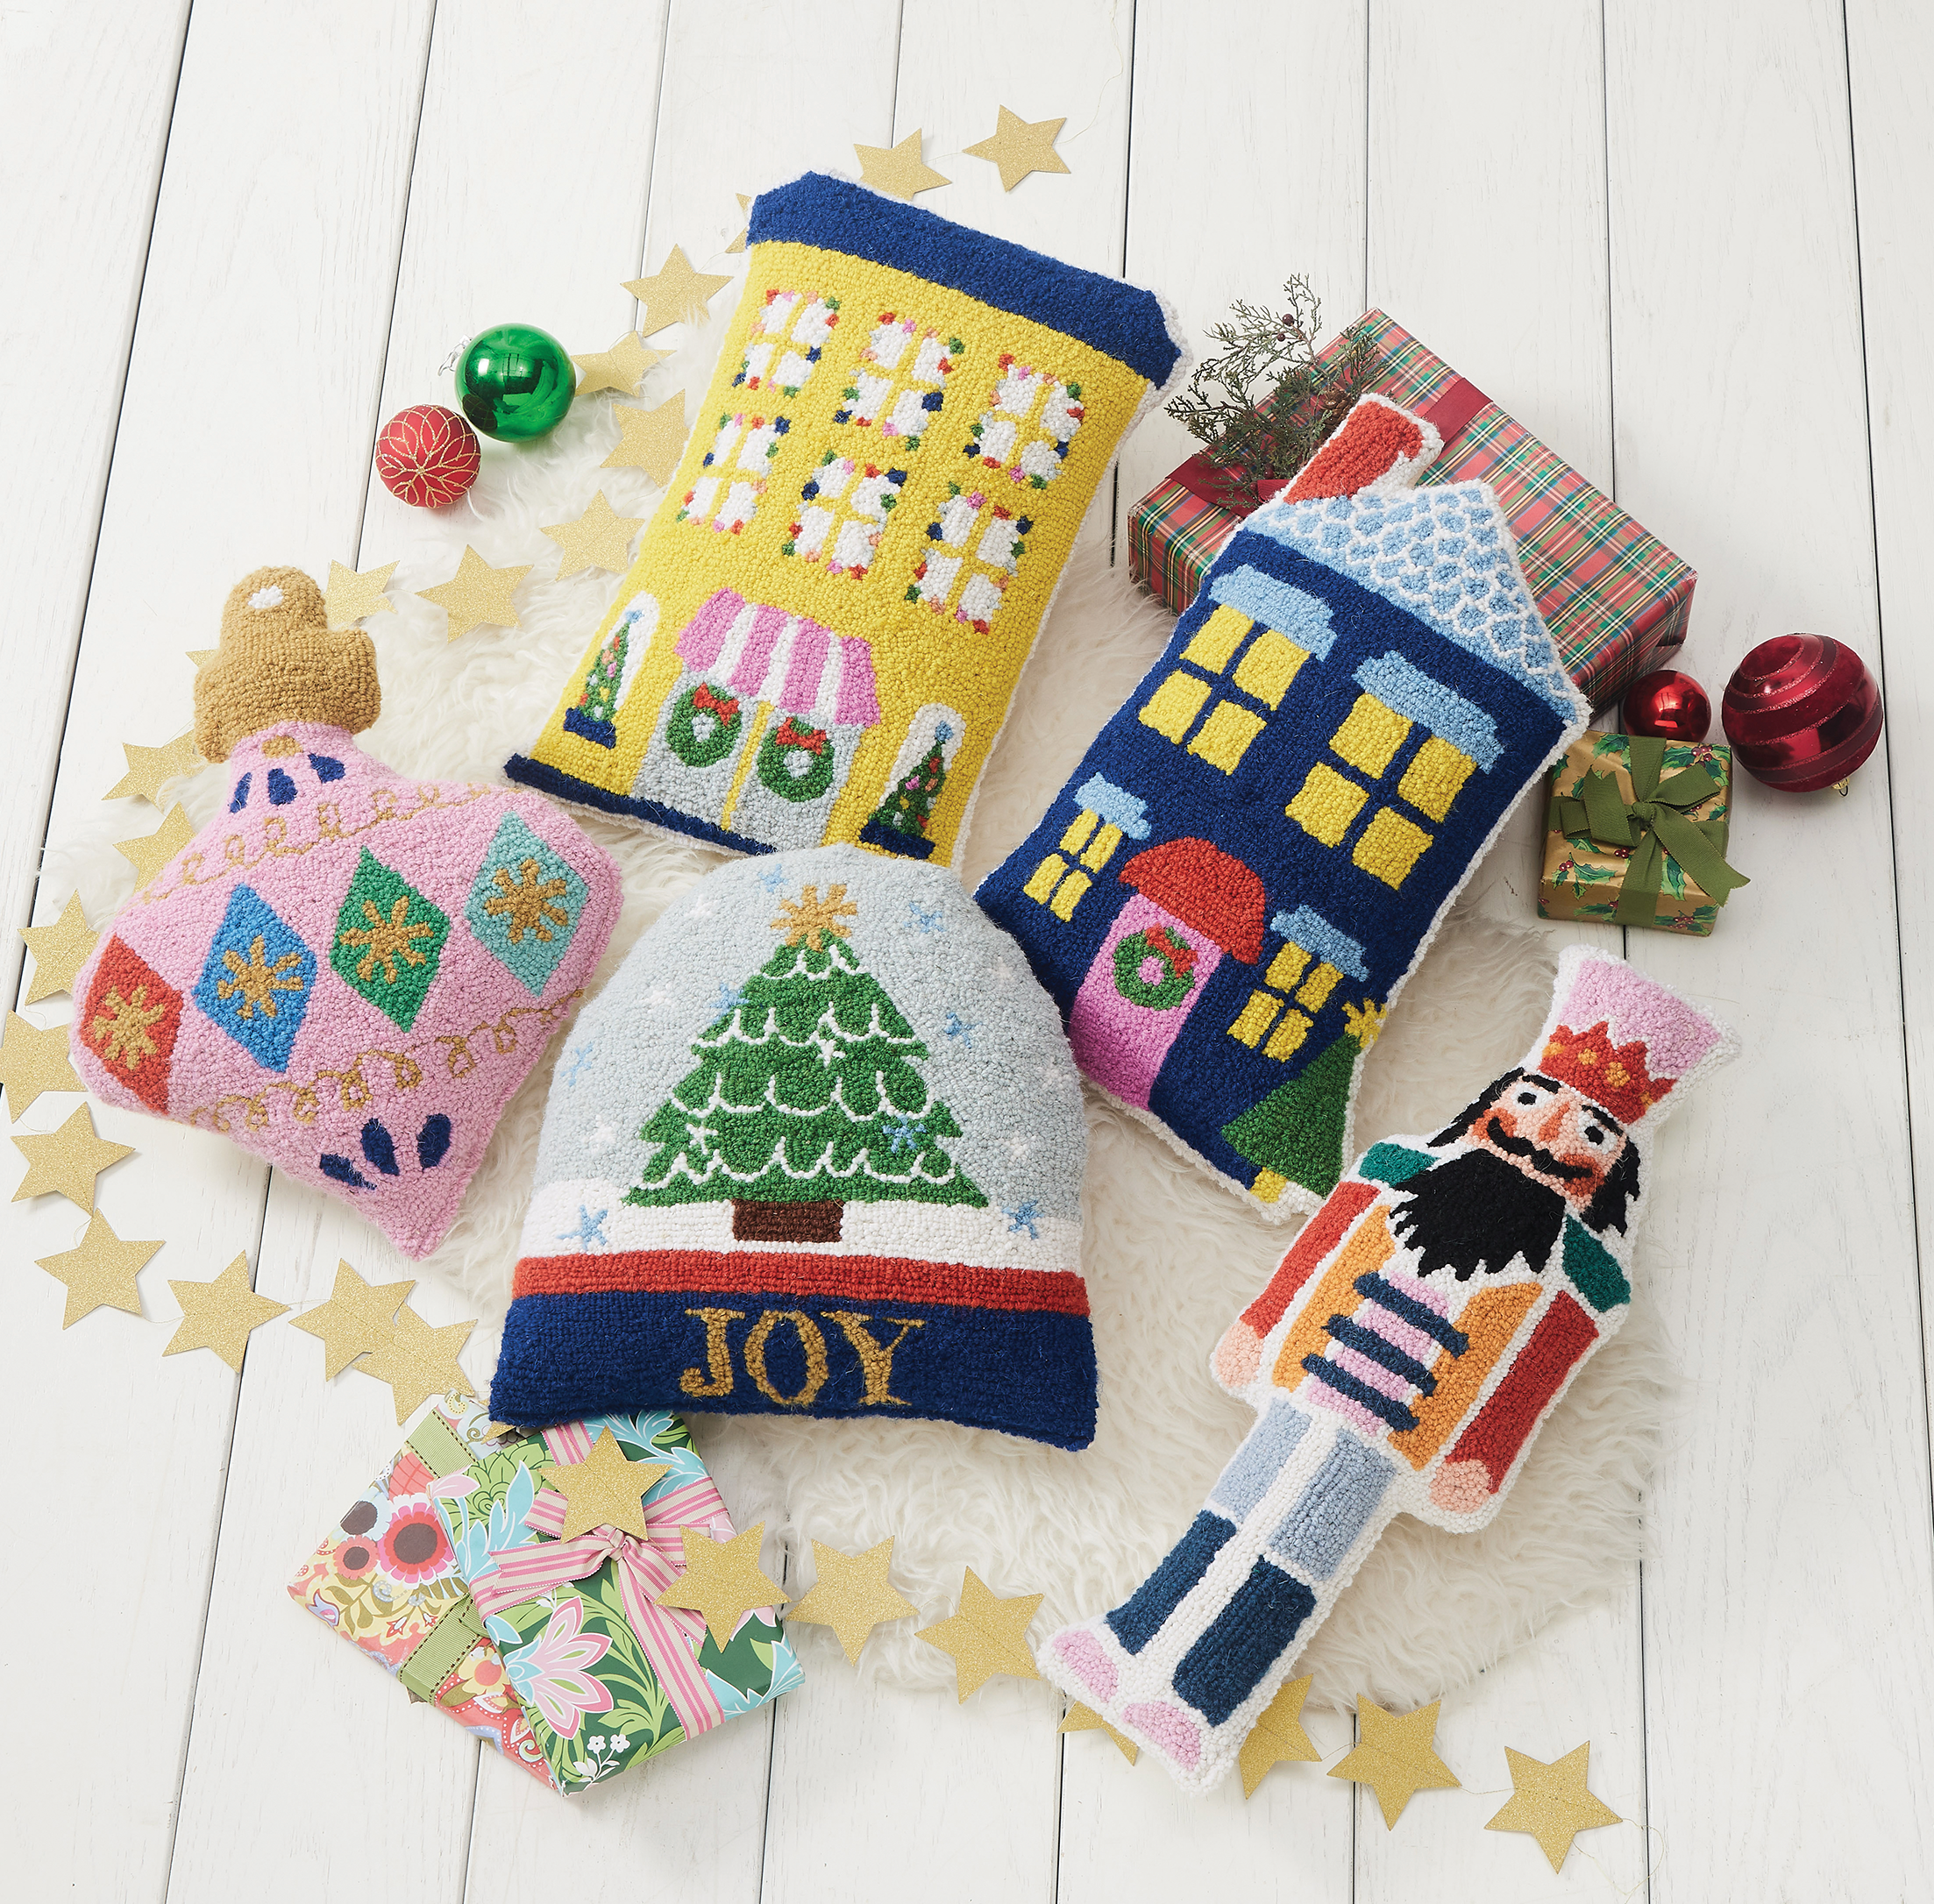  Shaped Pillows in Ornament, Yellow House, Blue House and Snow Globe. Peking Handicraft.